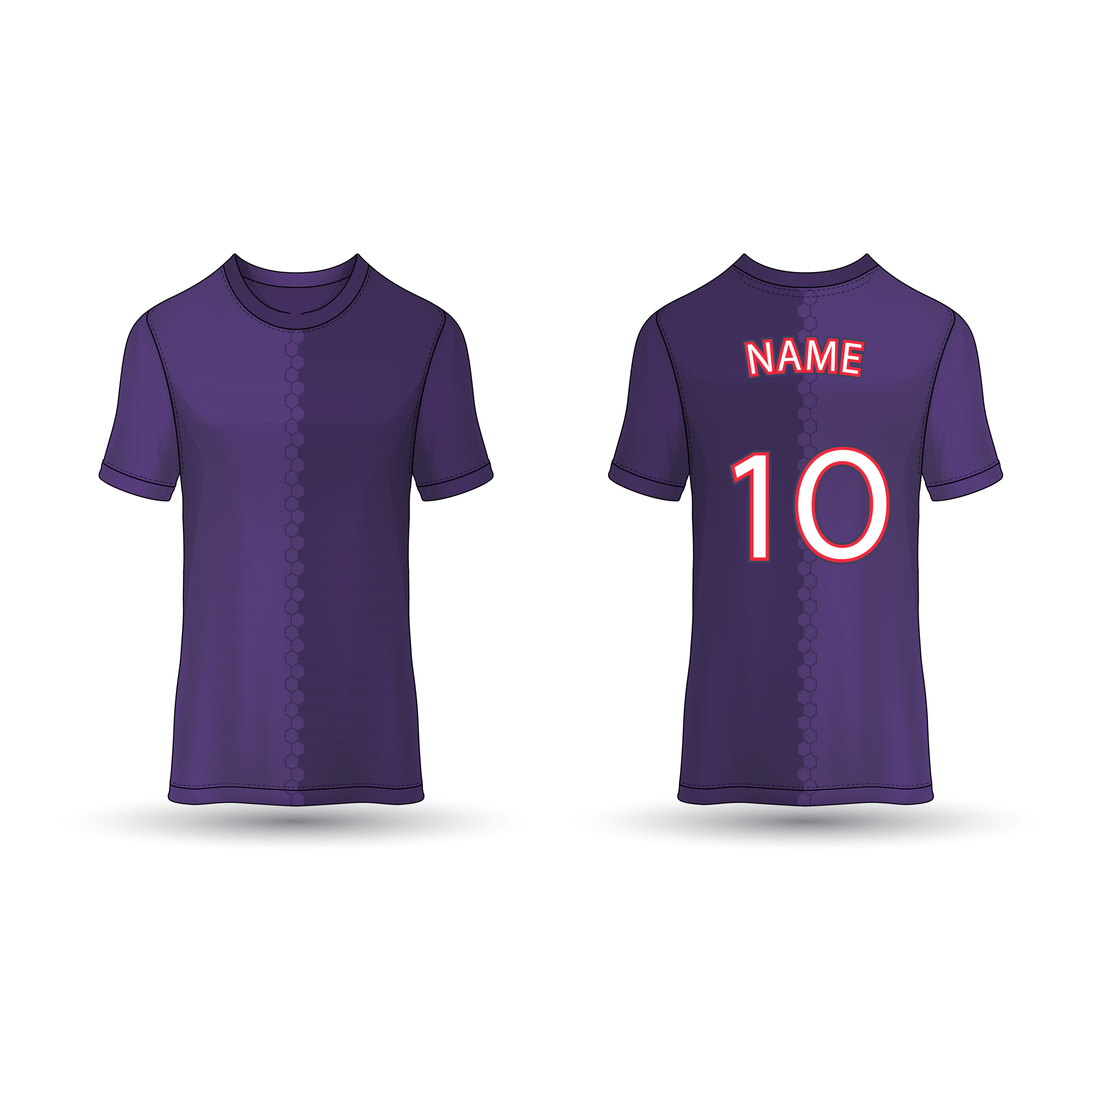 NEXT PRINT All Over Printed Customized Sublimation T-Shirt Unisex Sports Jersey Player Name & Number, Team Name NP50000224